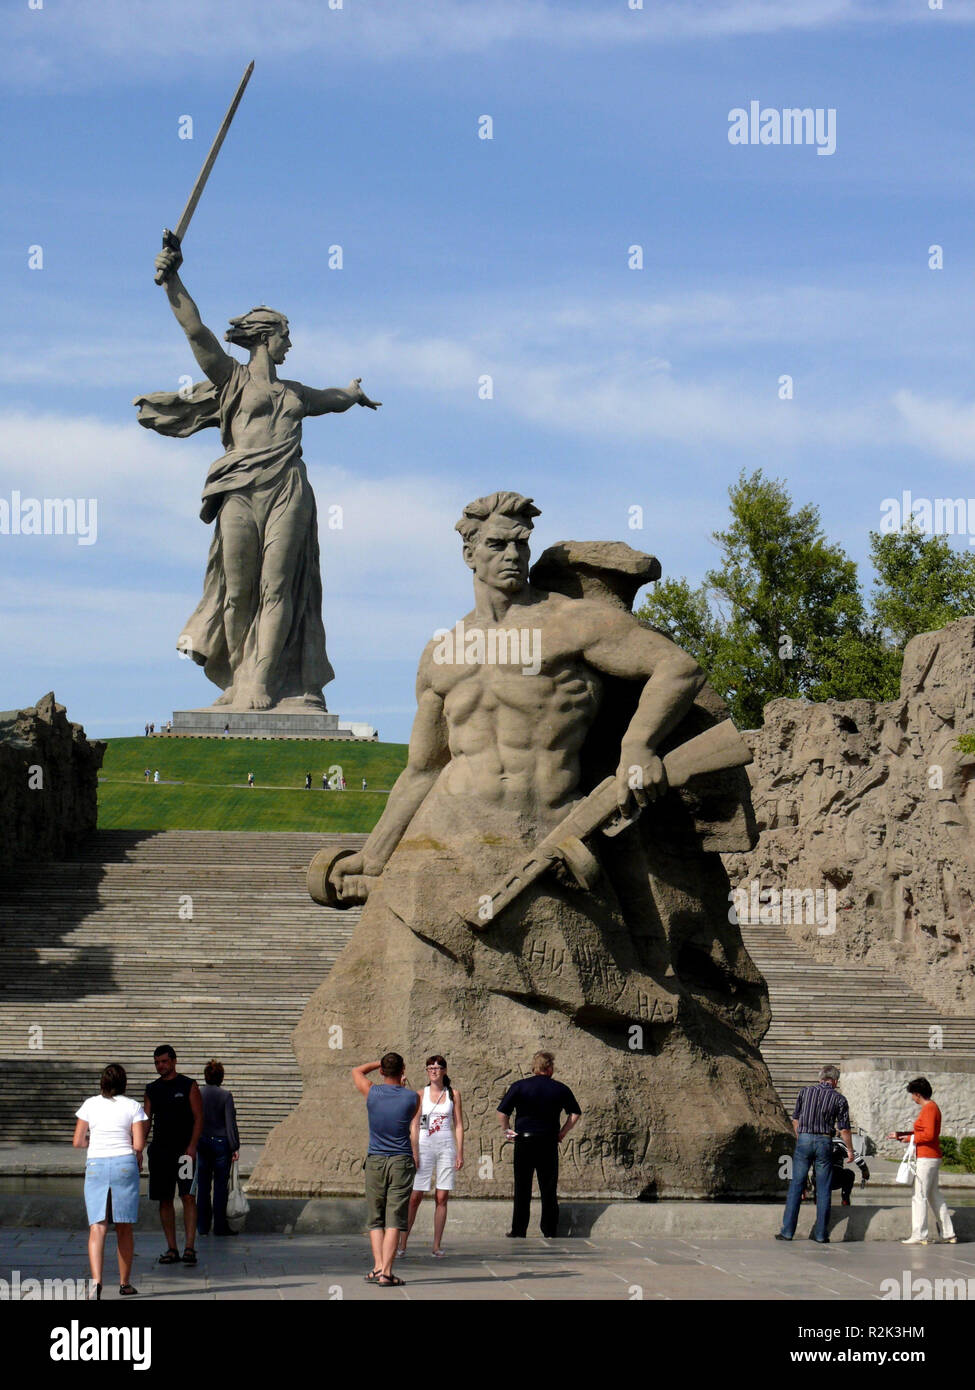 Russia, Volgograd, Mamayev hill, monument, battle of Stalingrad, from September 1942 to February 1943, giant statue 'The Motherland Calls', soldiers of the red army, Stock Photo